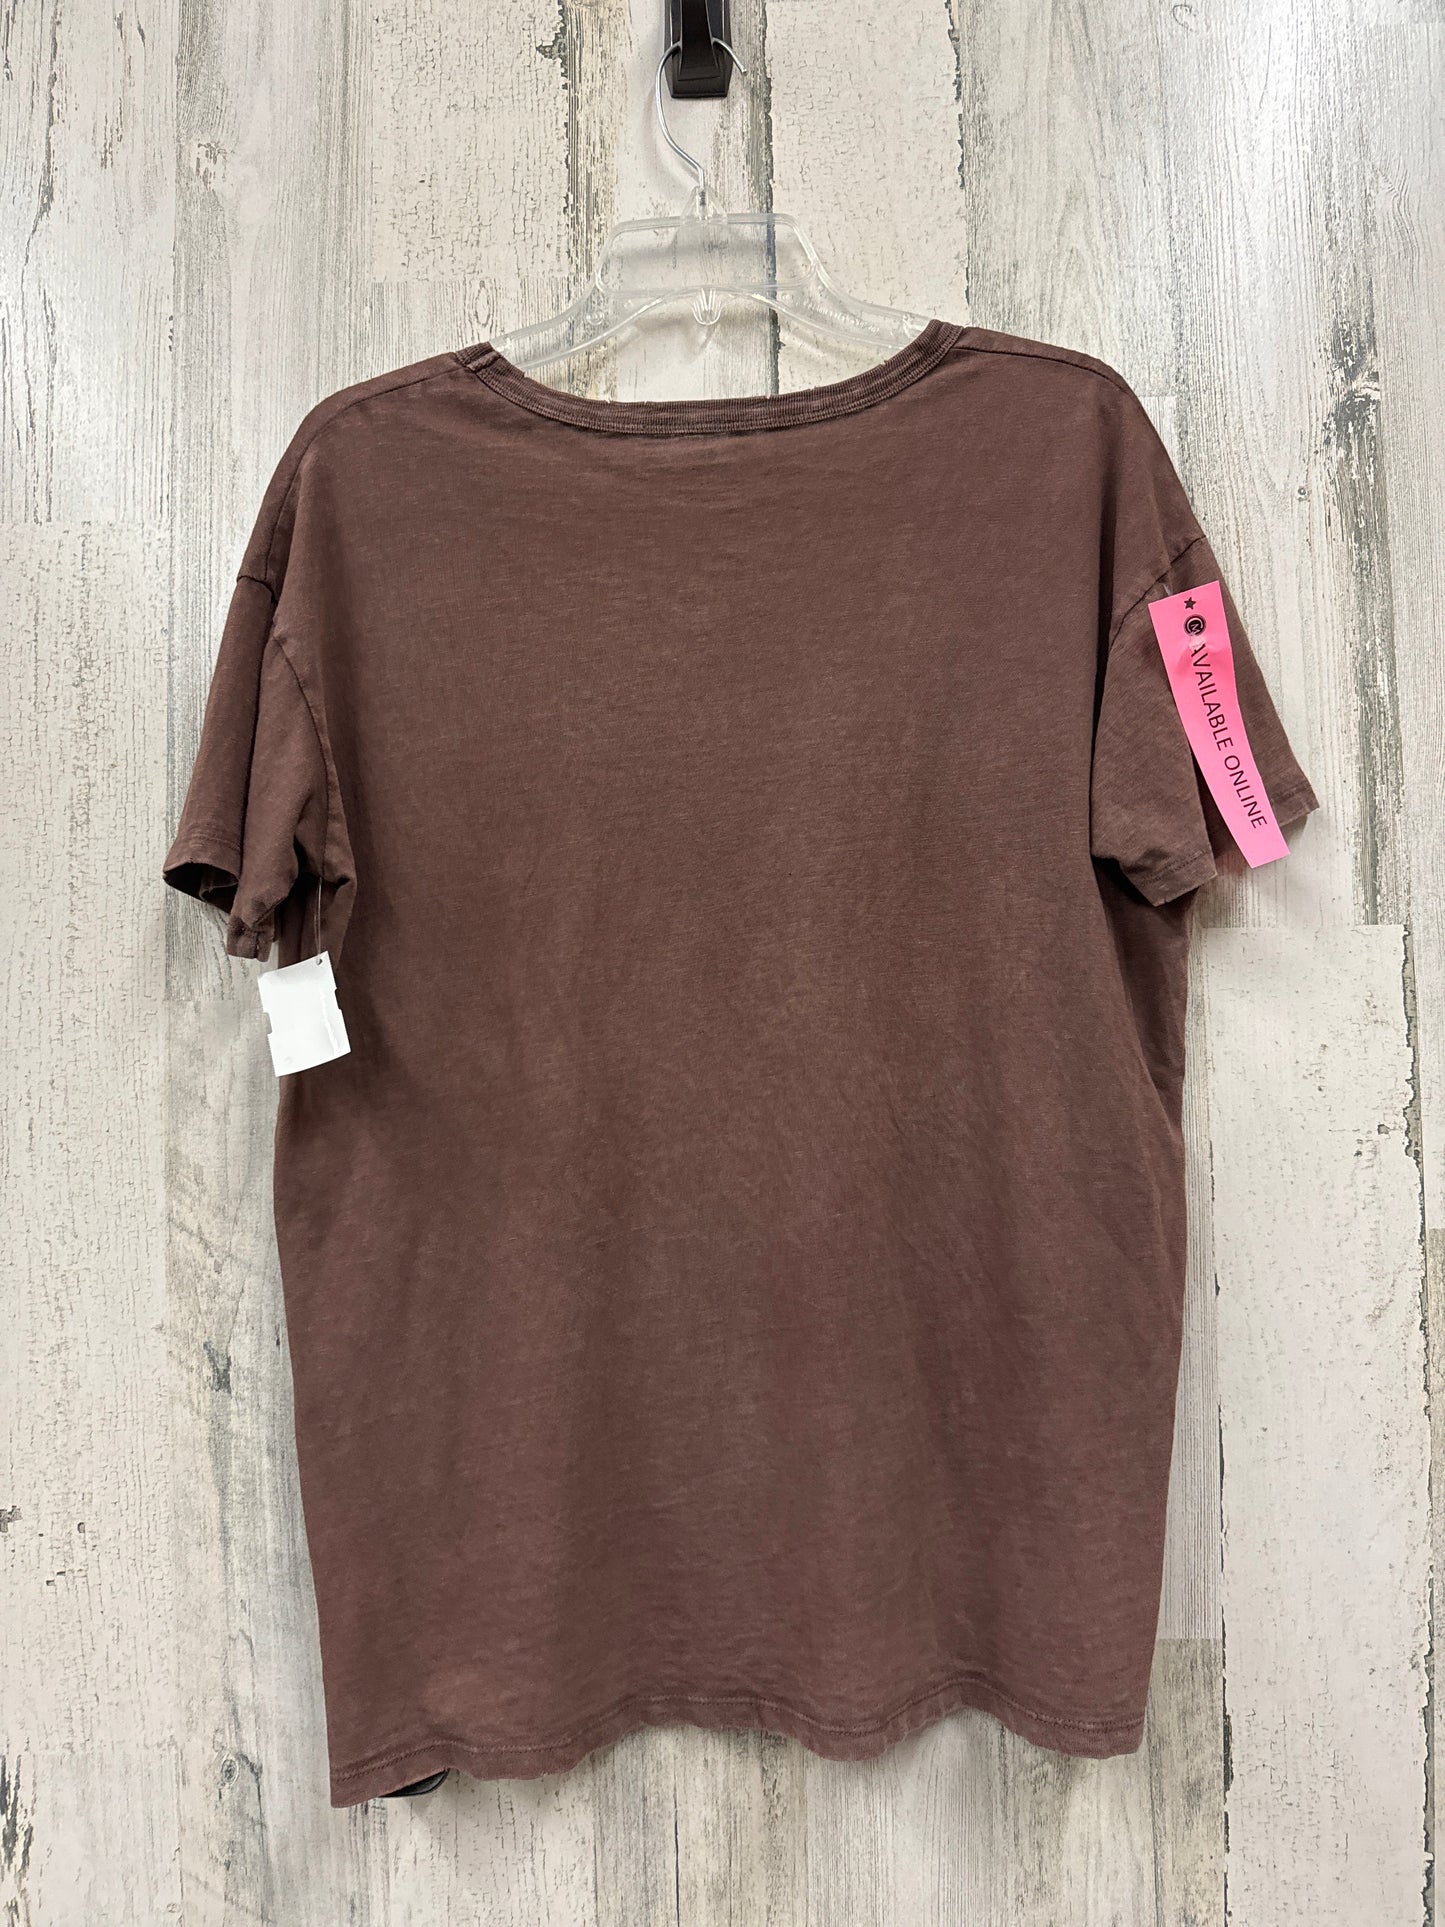 Brown Top Short Sleeve Basic Aerie, Size Xs